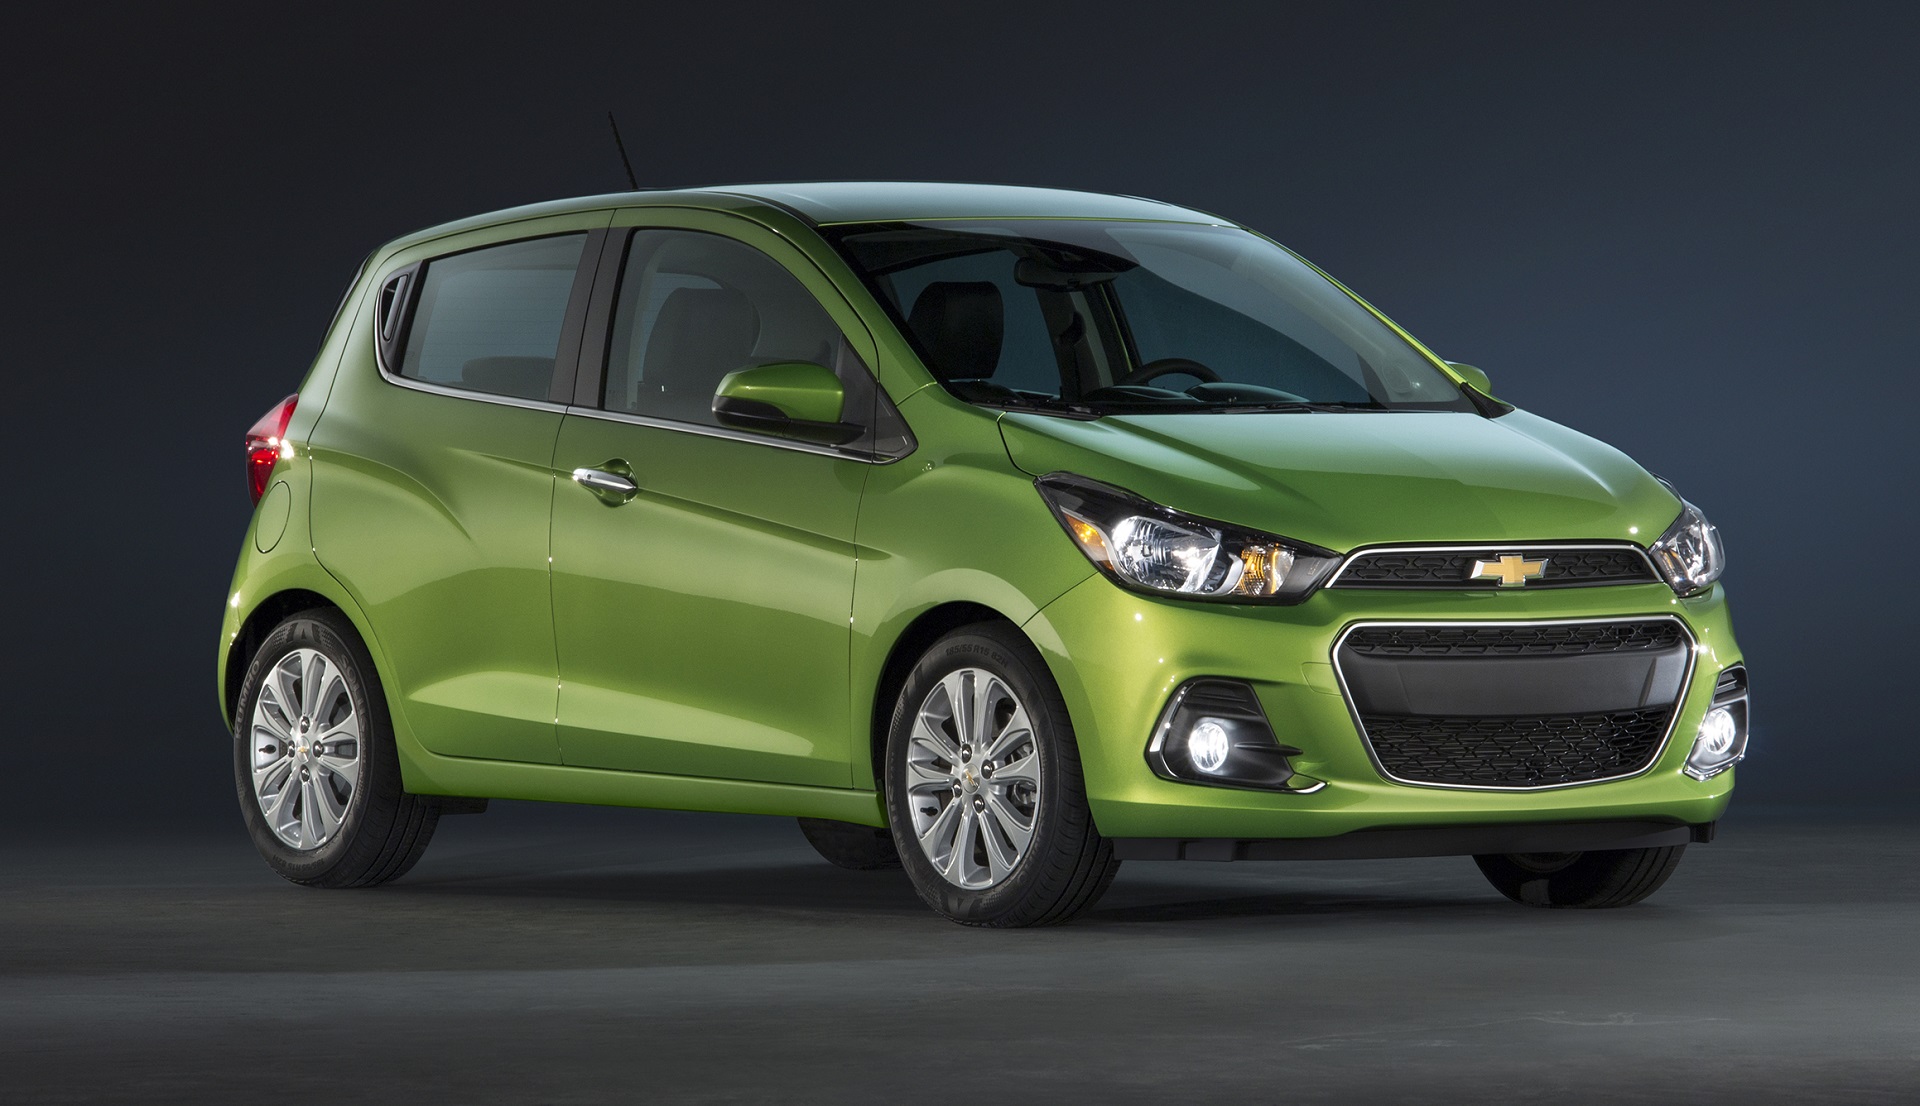 2018 Chevrolet Spark (Chevy) Review, Ratings, Specs, Prices, and Photos ...